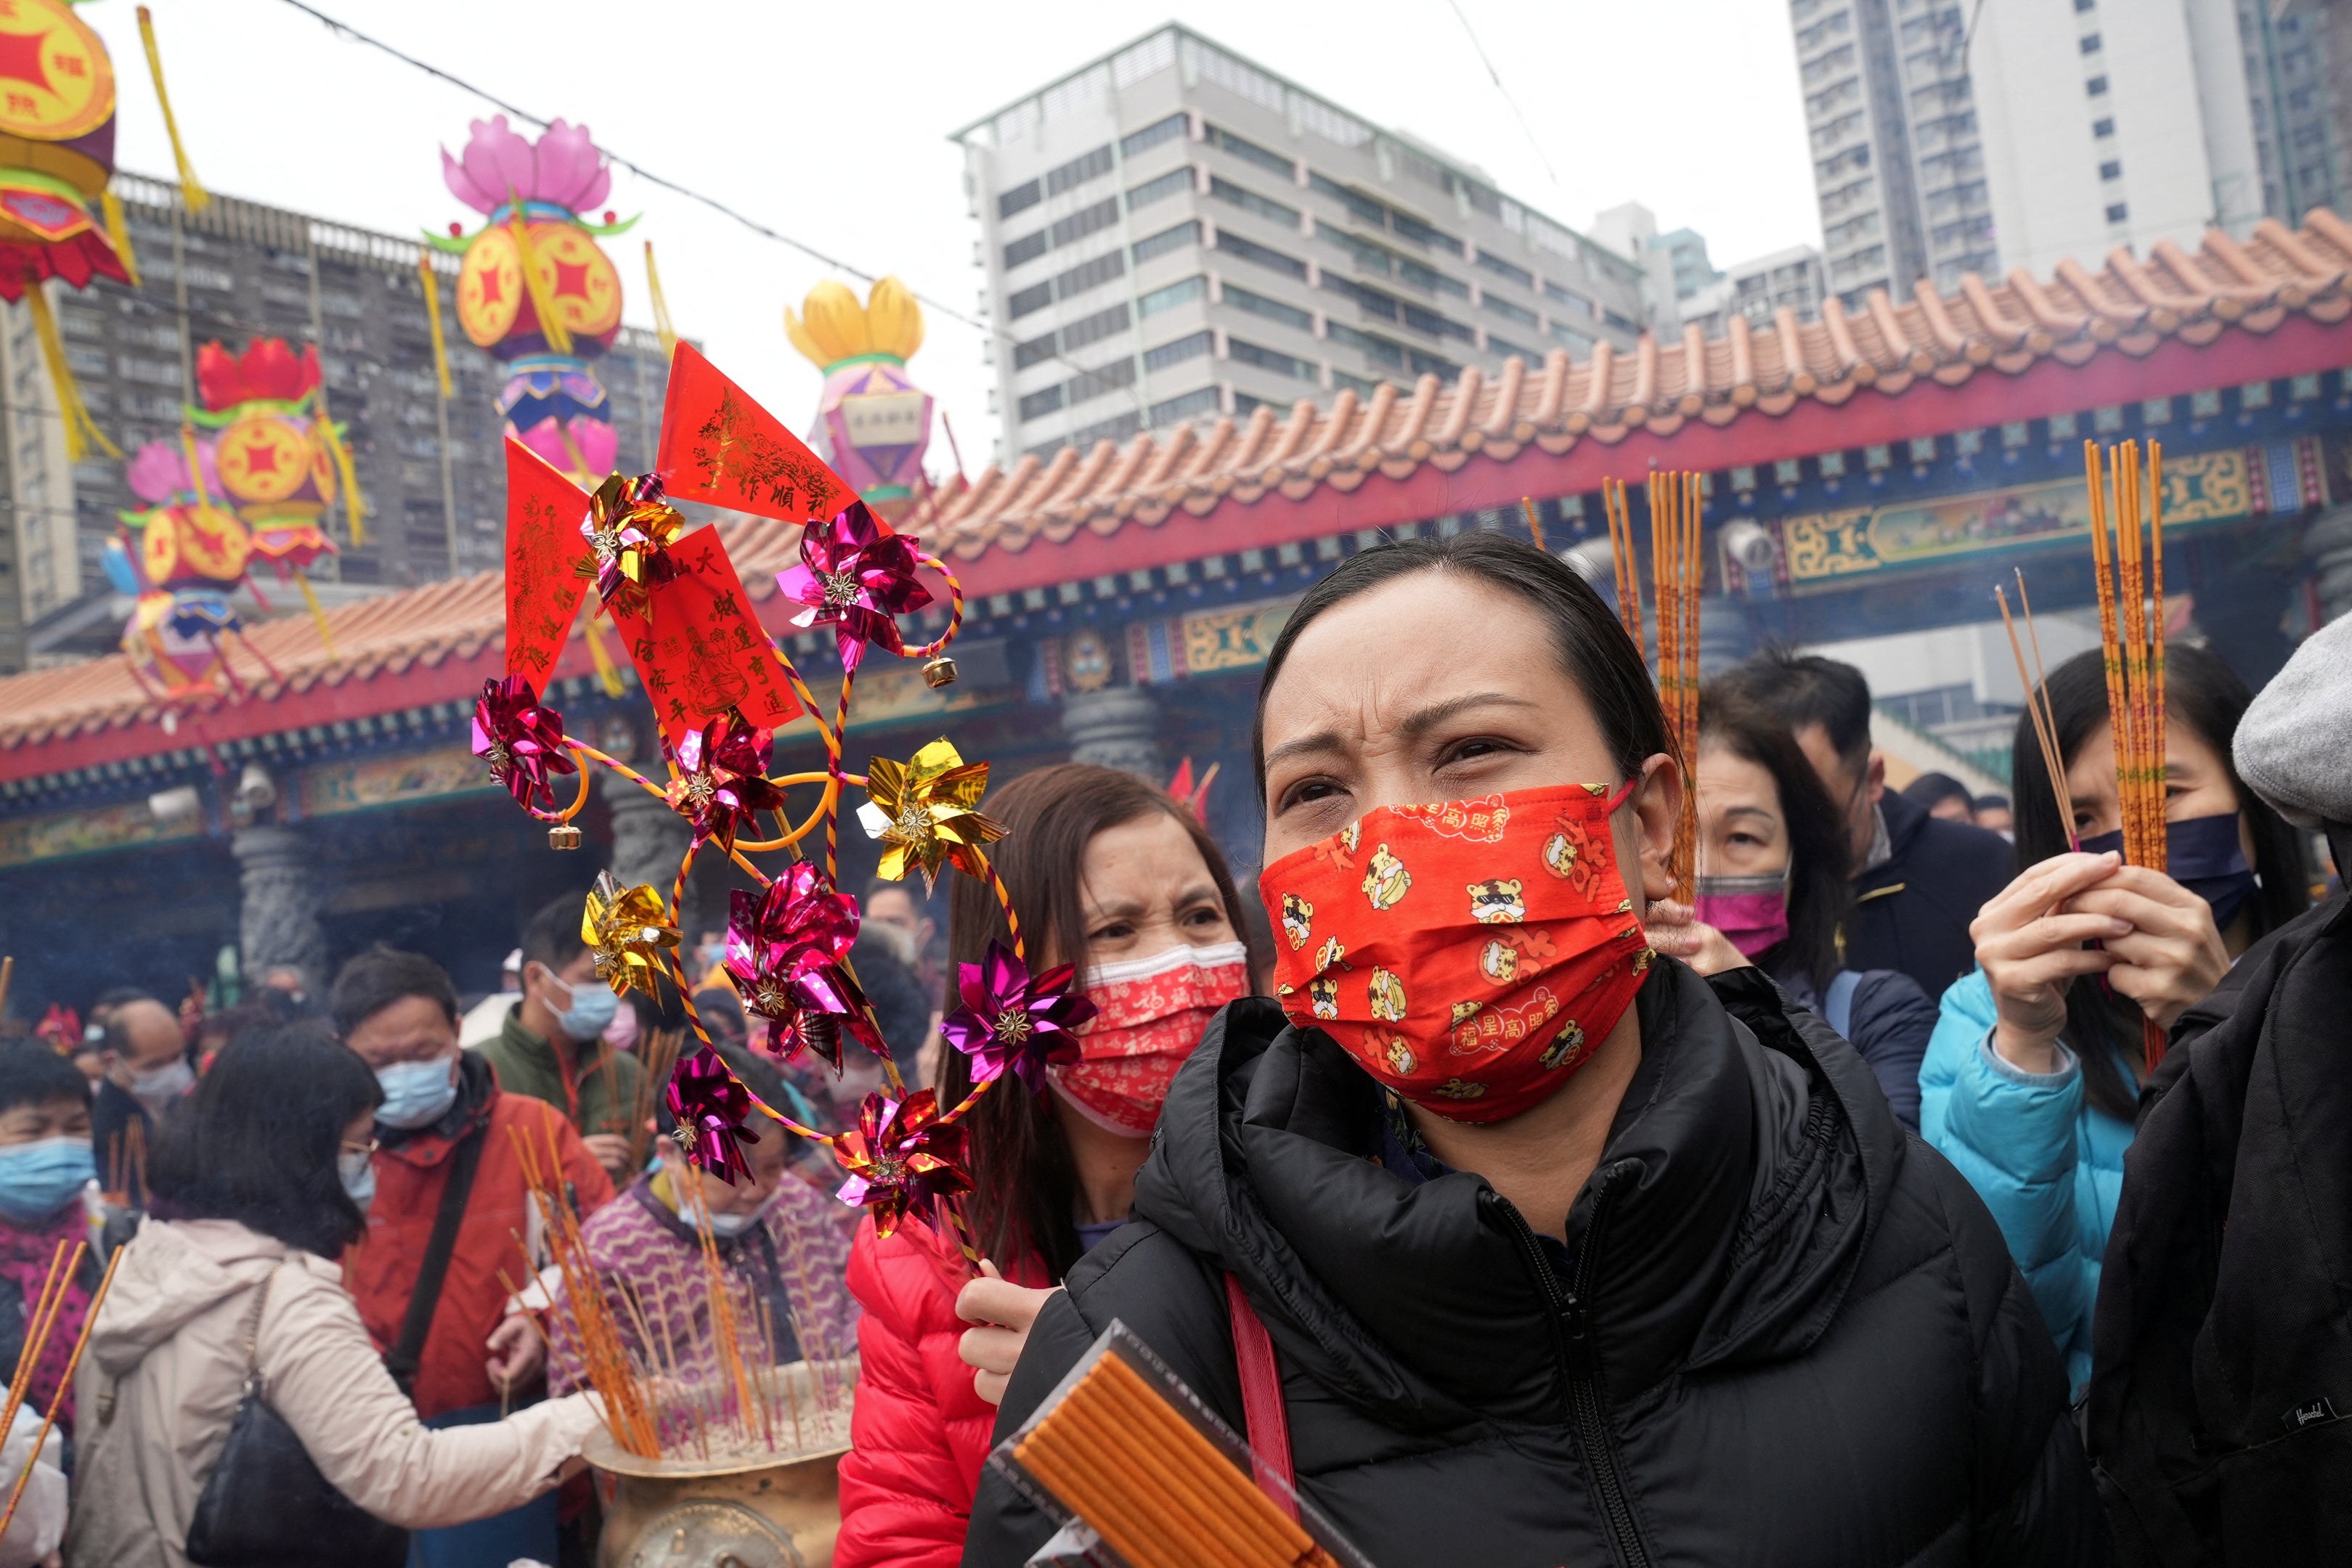 Worshippers wearing face masks visit the Wong Tai Sin temple in Hong Kong, 4 February 2022